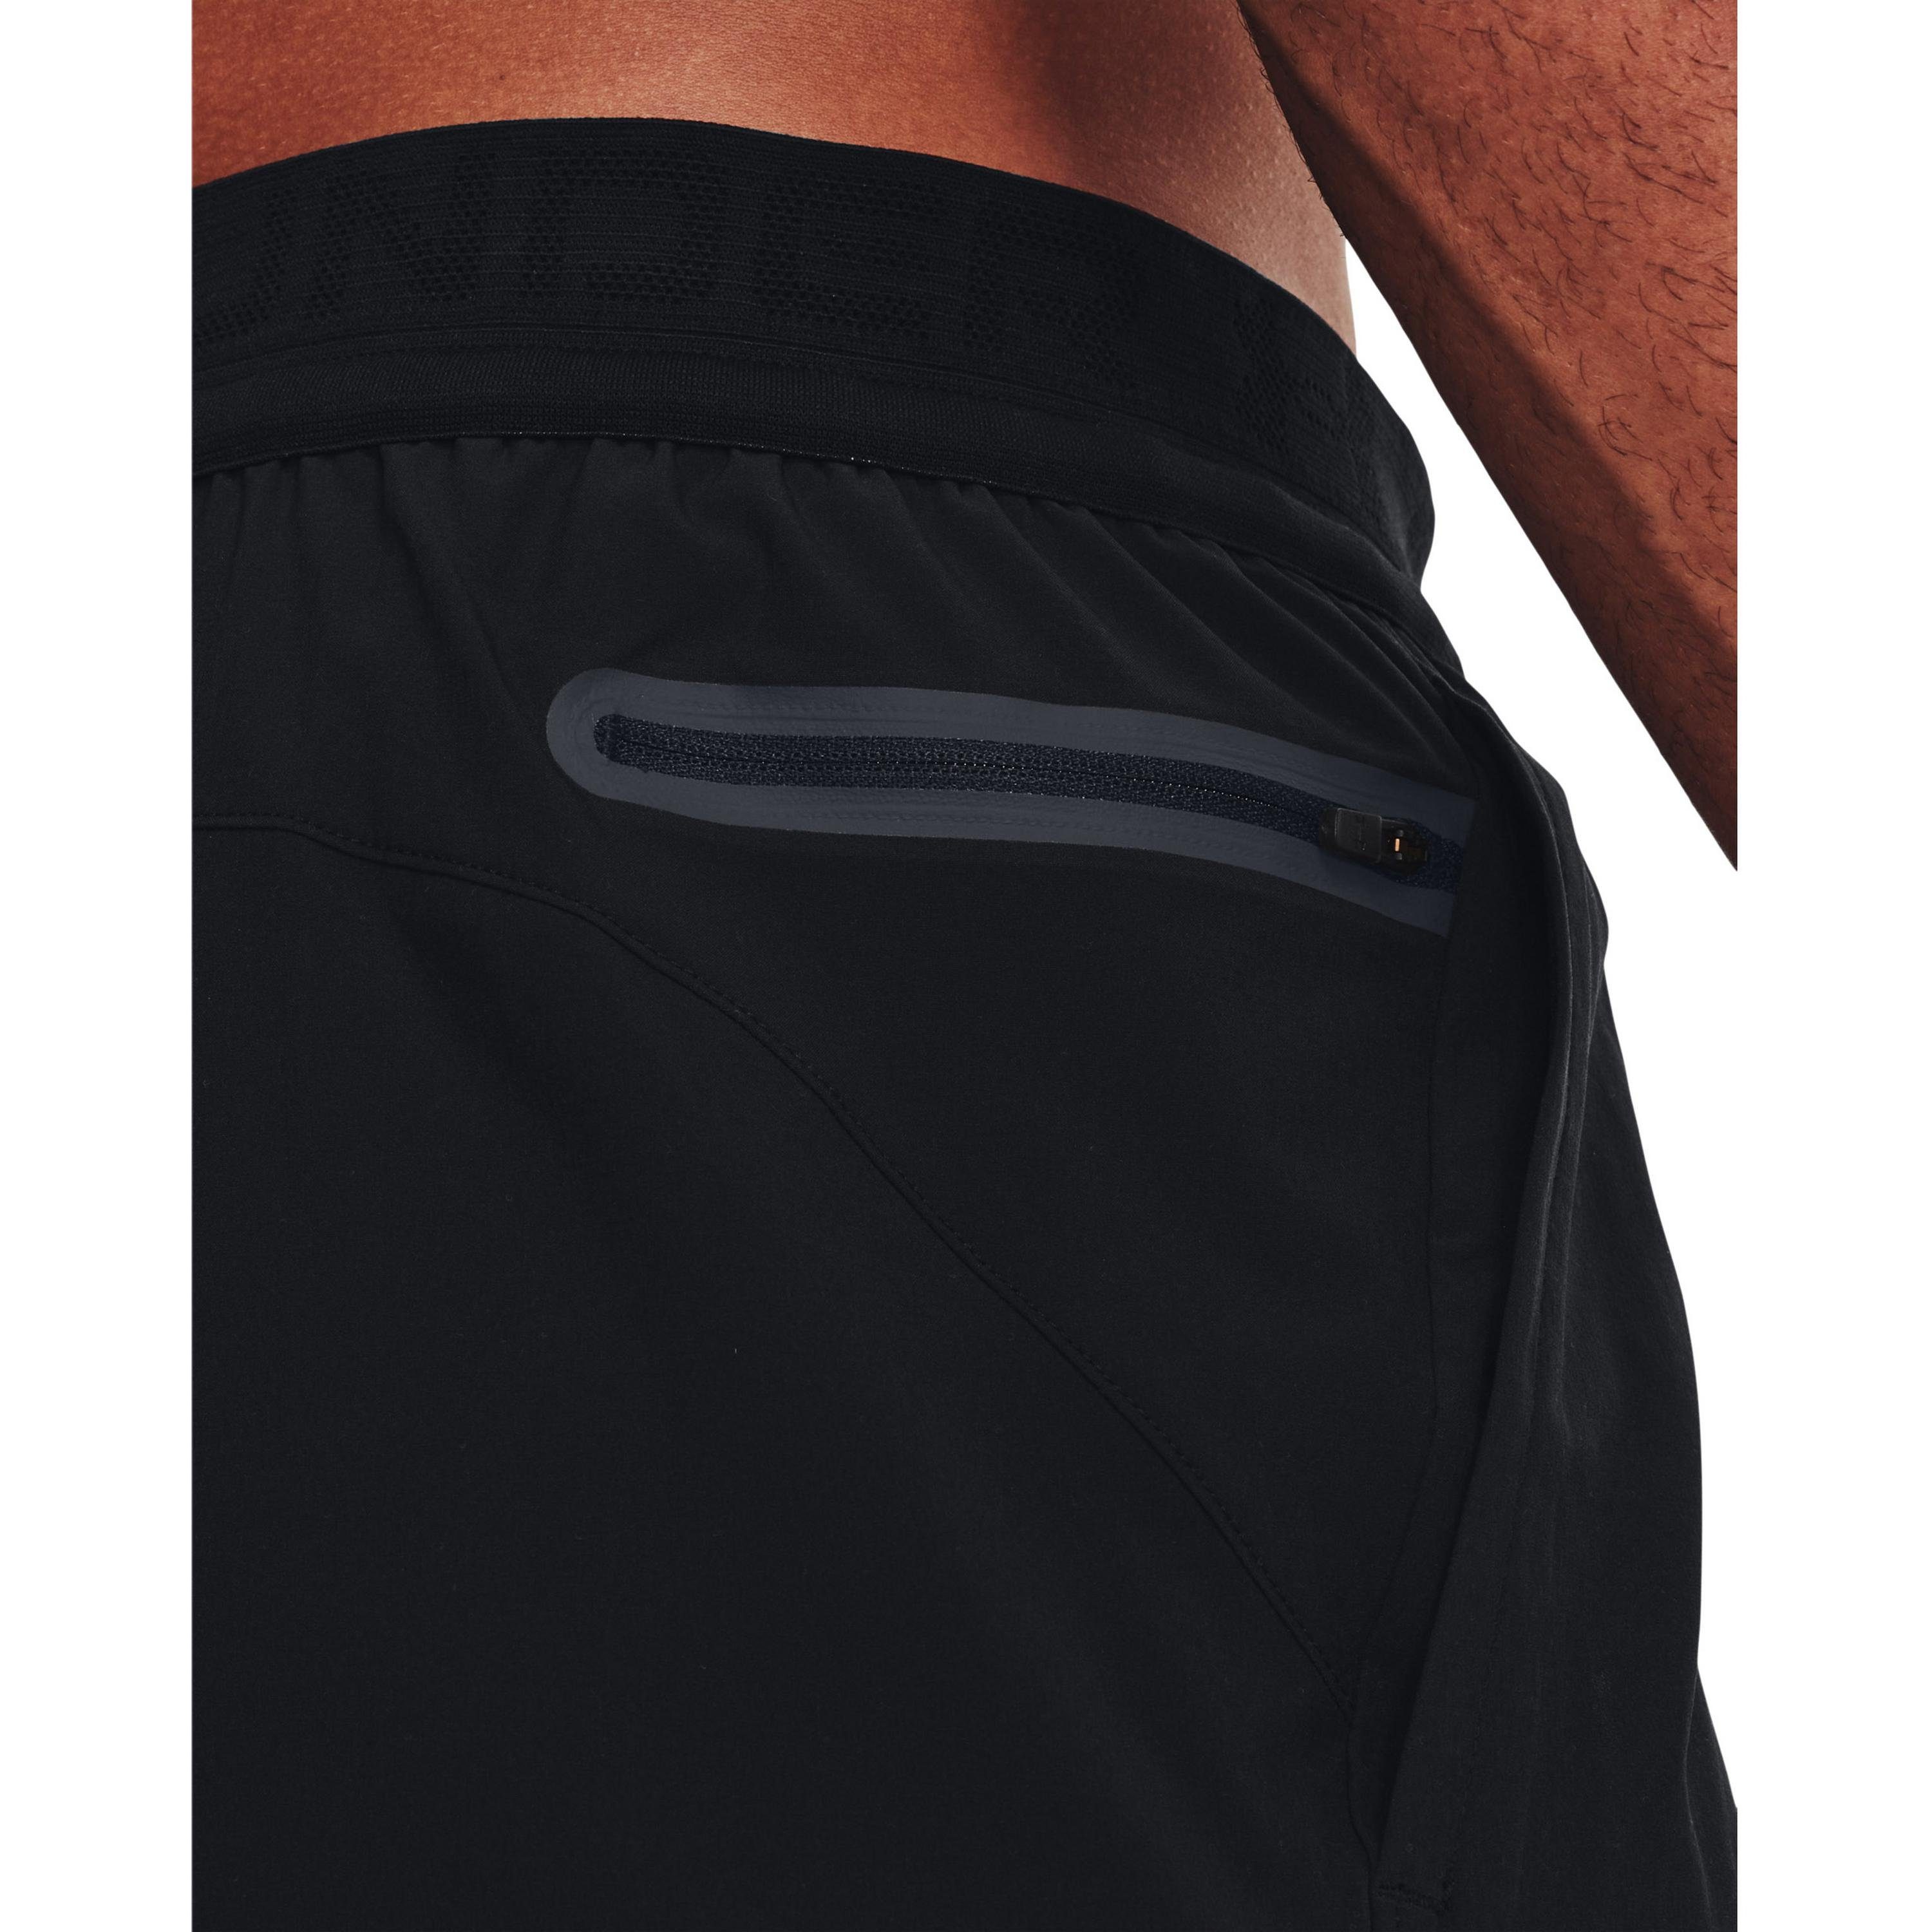 Armour® Funktionsshorts Peak black-pitch Under gray